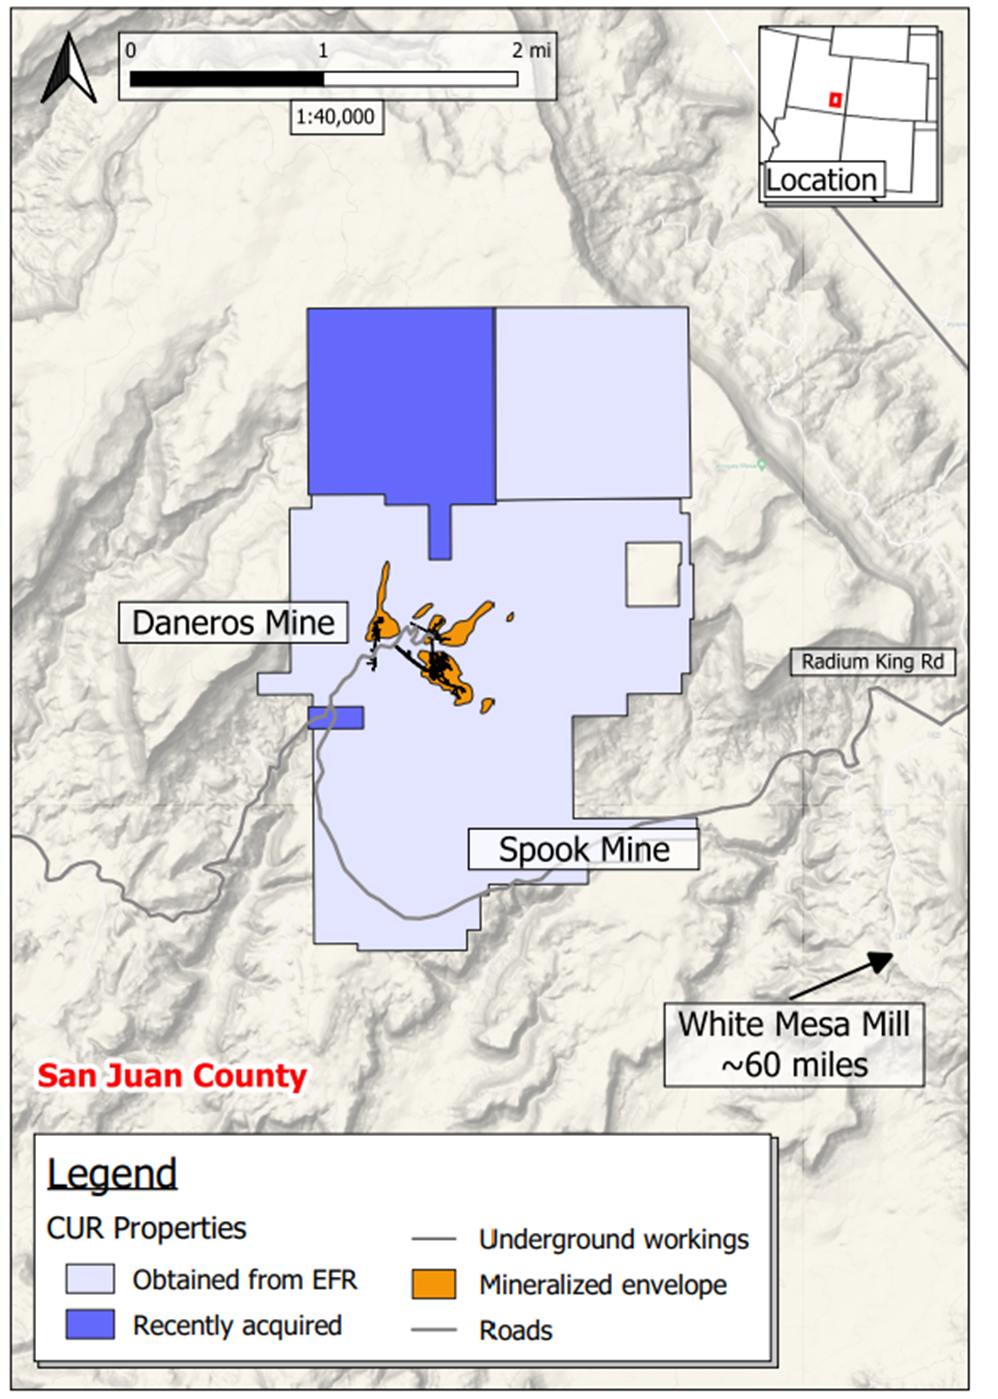 Daneros Mine location and newly acquired claims